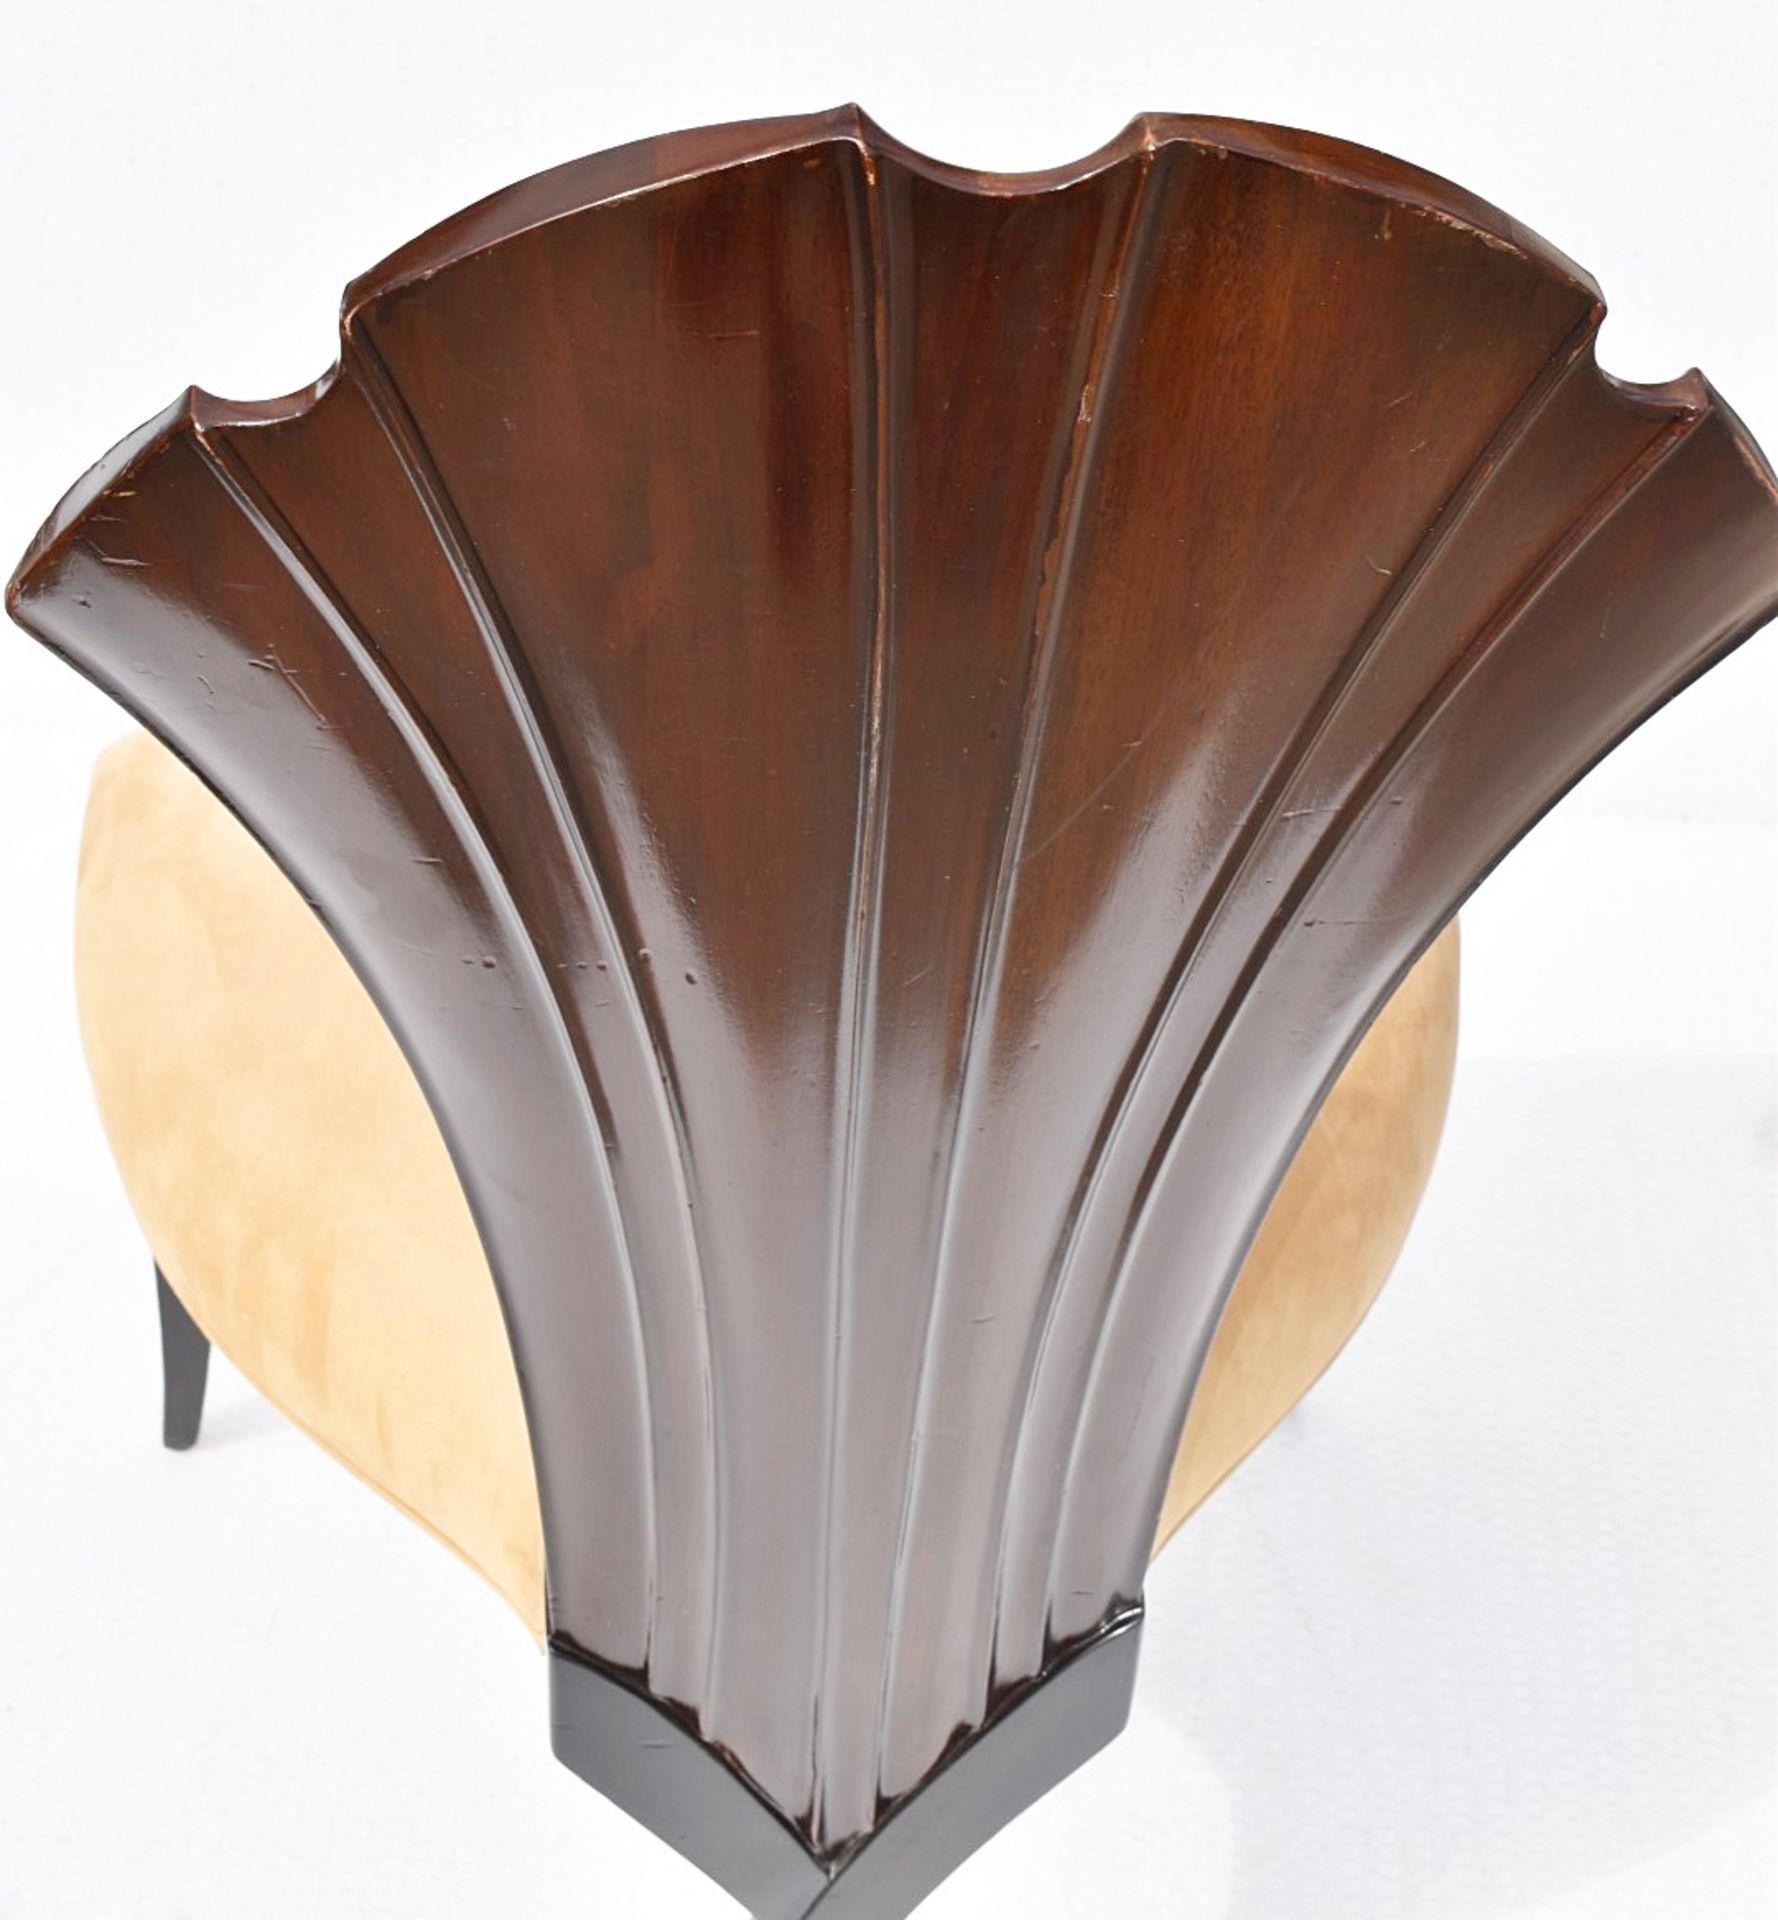 6 x CHRISTOPHER GUY 'La Croisette' Luxury Hand-carved Solid Mahogany Designer Dining Chairs - - Image 4 of 11